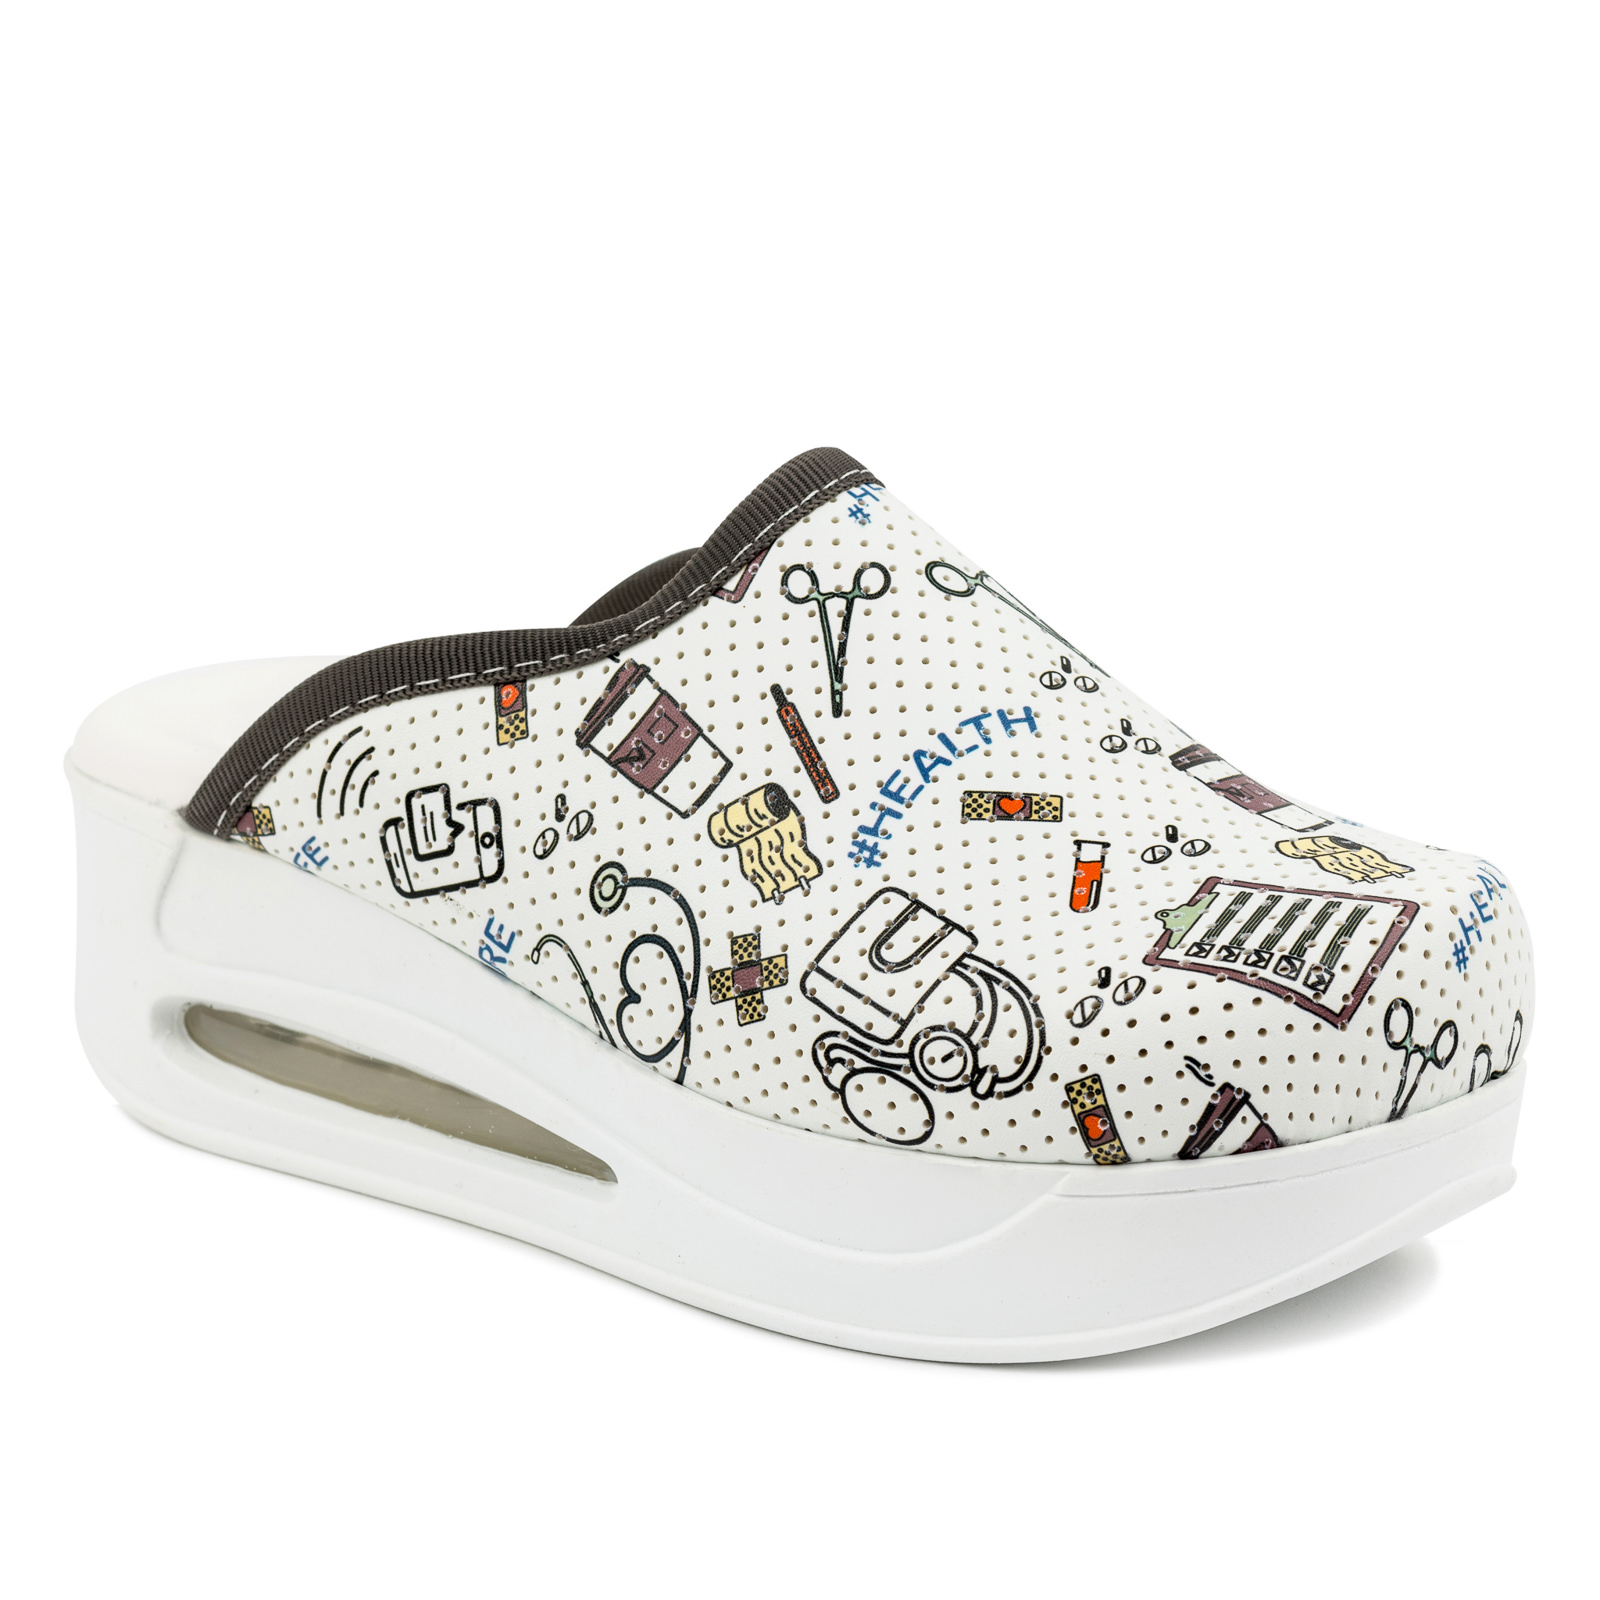 Patterned women clogs A035 - DOCTOR AIR - WHITE